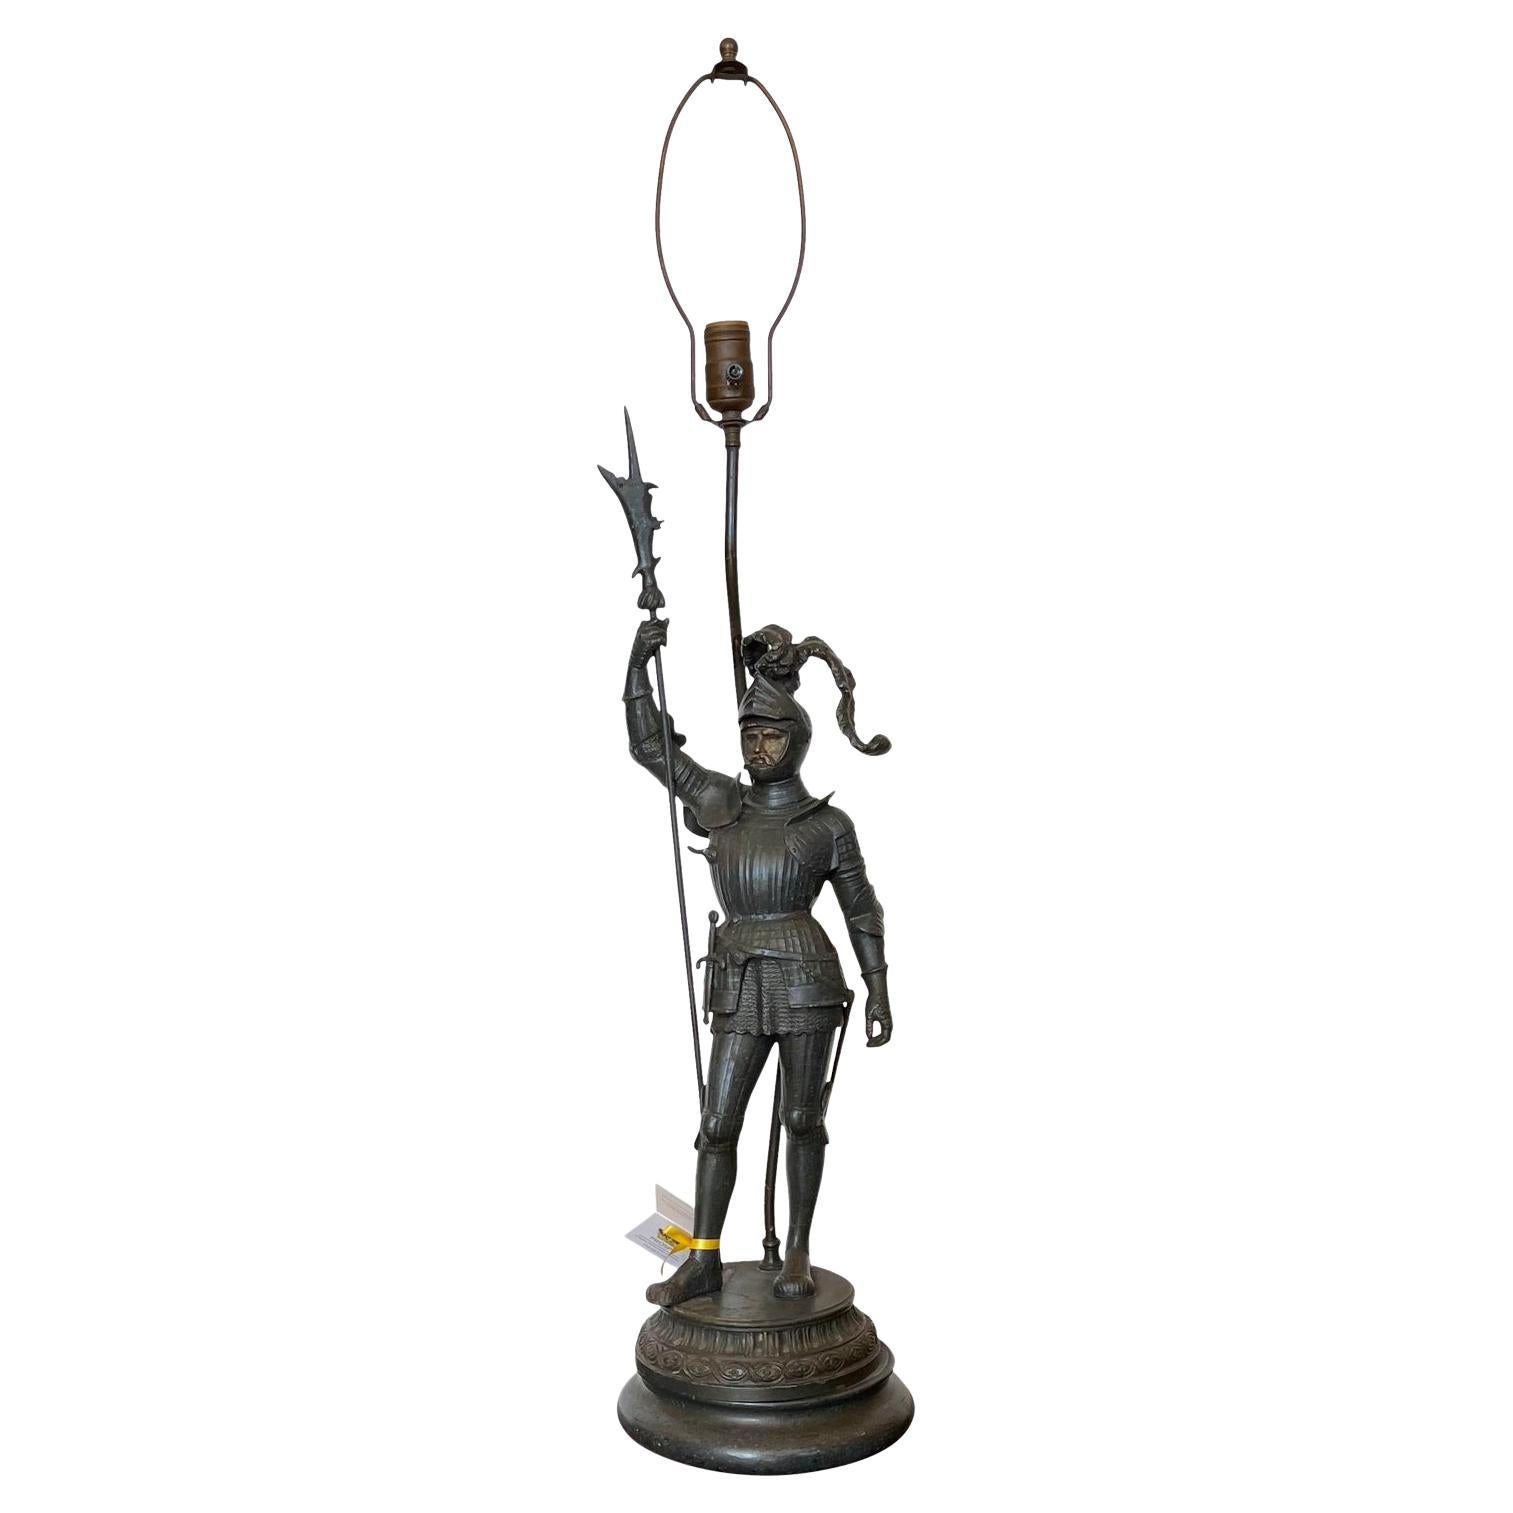 Antique Knight in Armor Figural Table Lamp, Early 20th Century